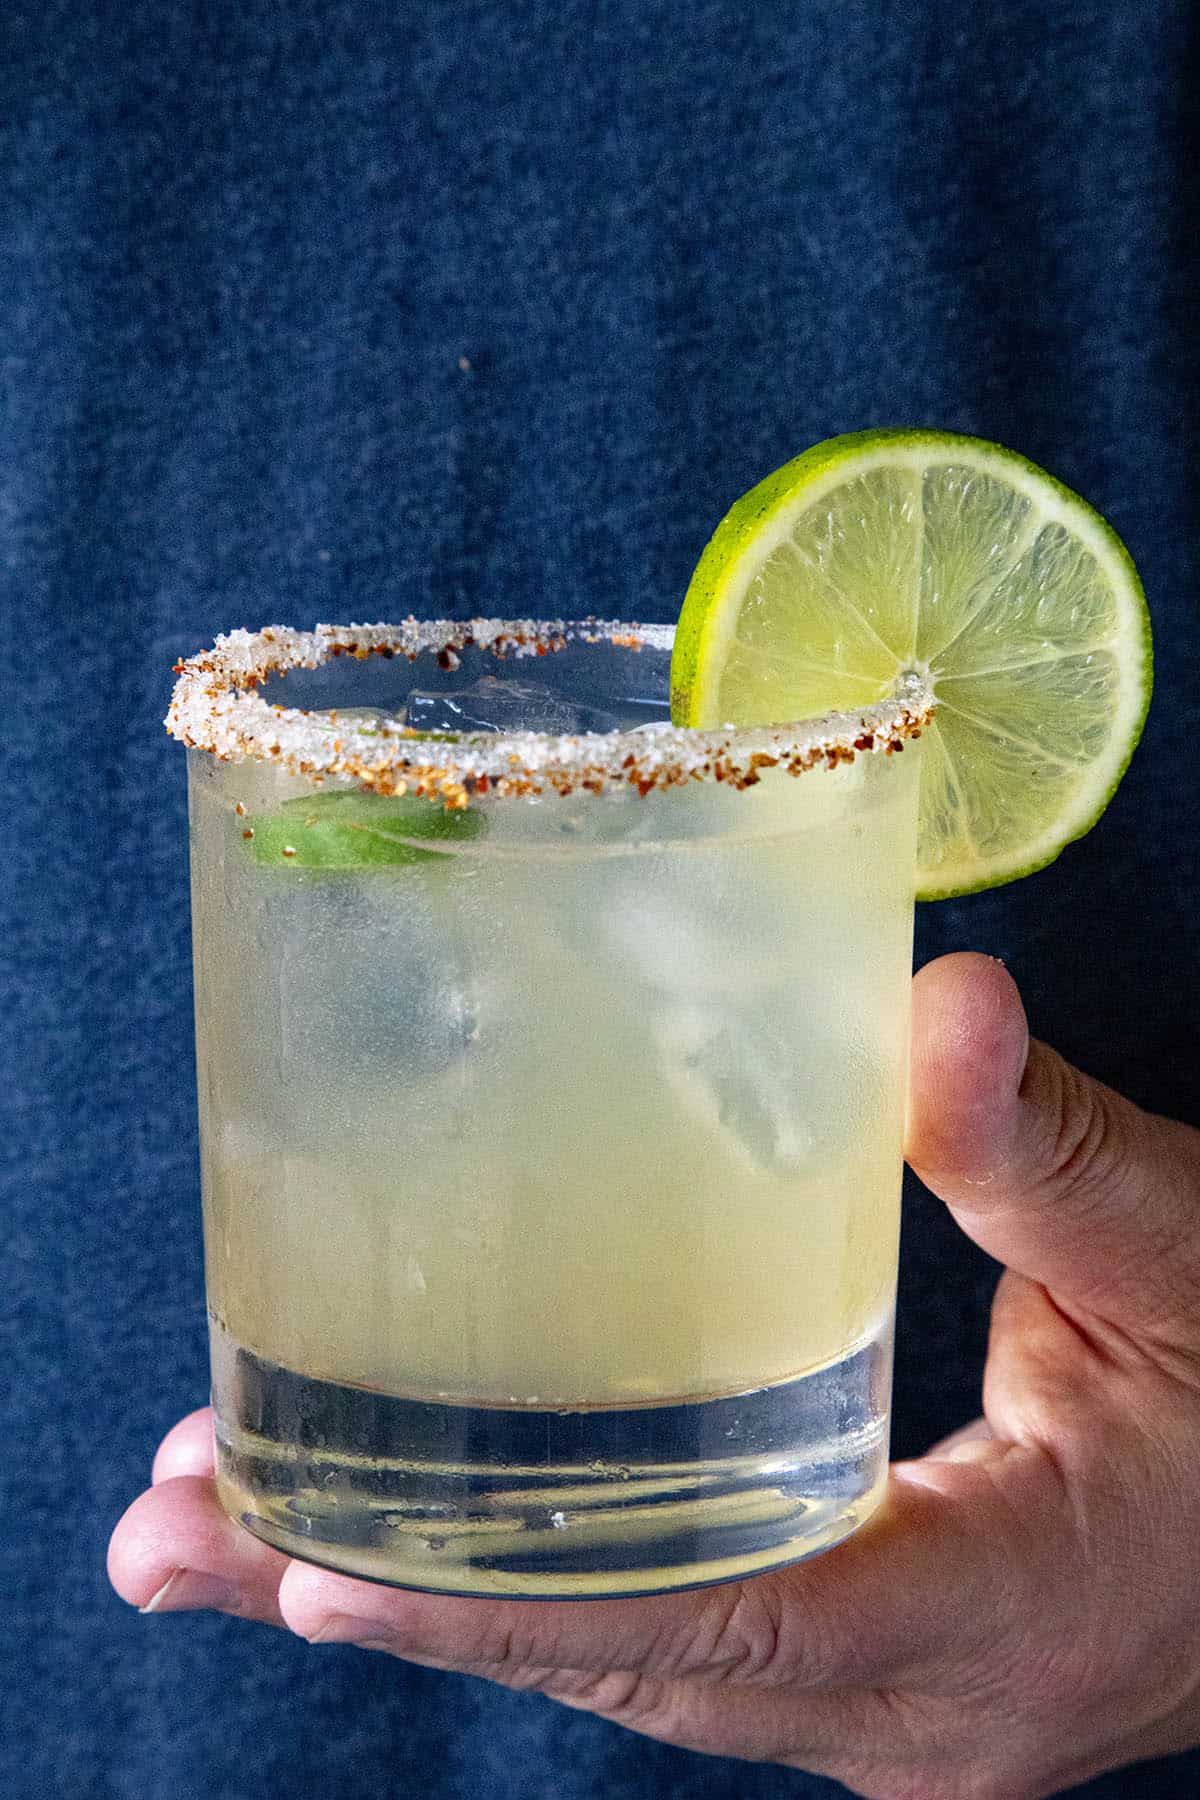 Mike holding a spicy margarita in a glass with a salt and tajin coated rim, garnished with lime and jalapeno slices